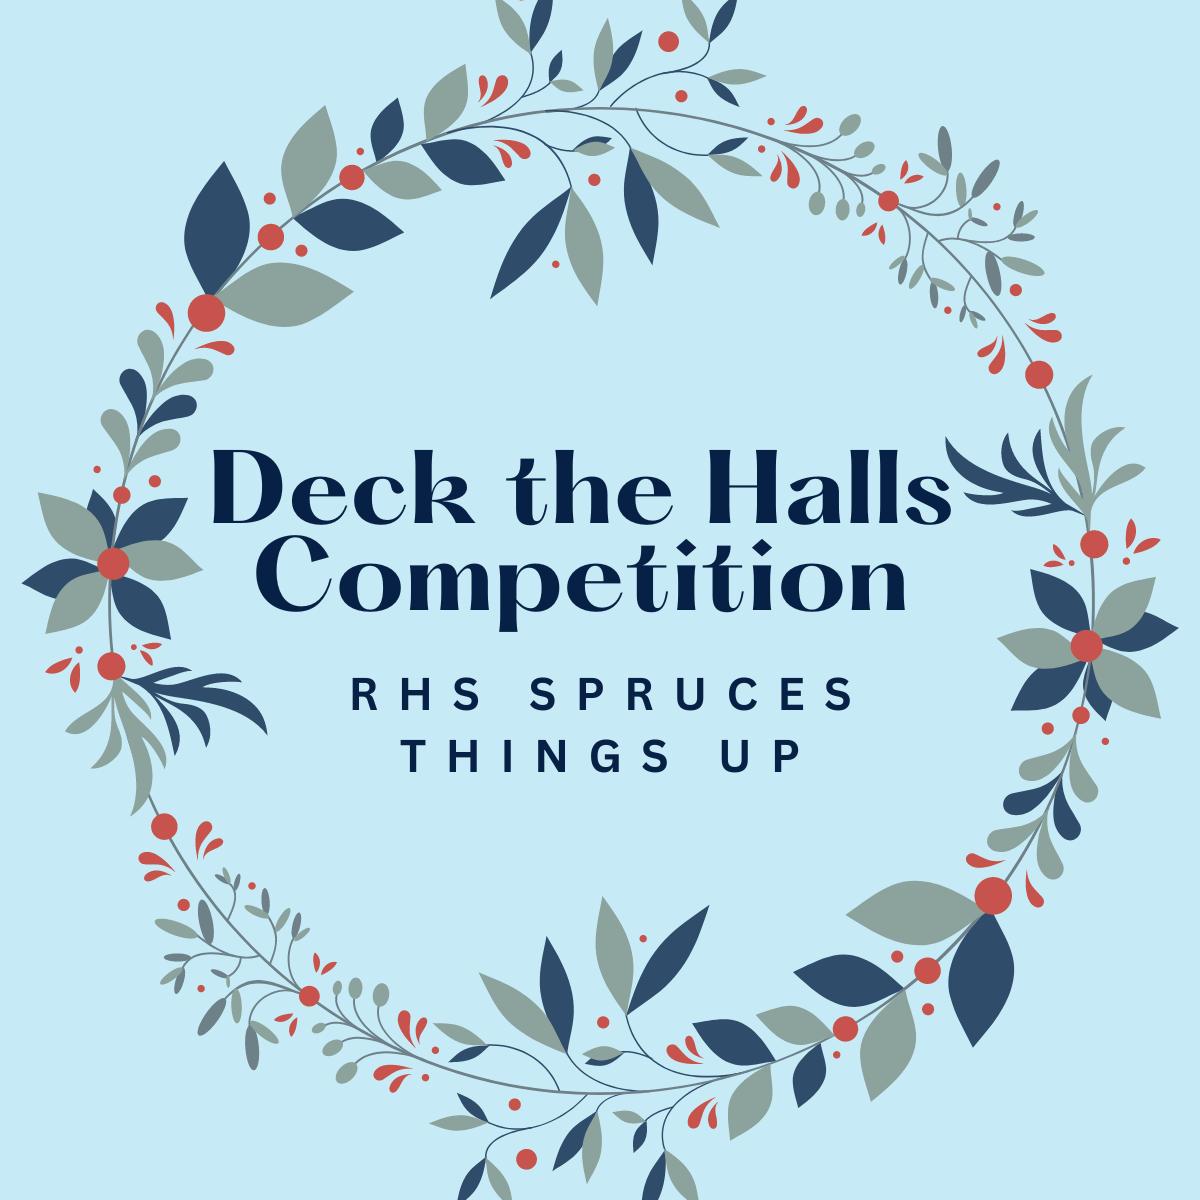 Deck the Halls Competition